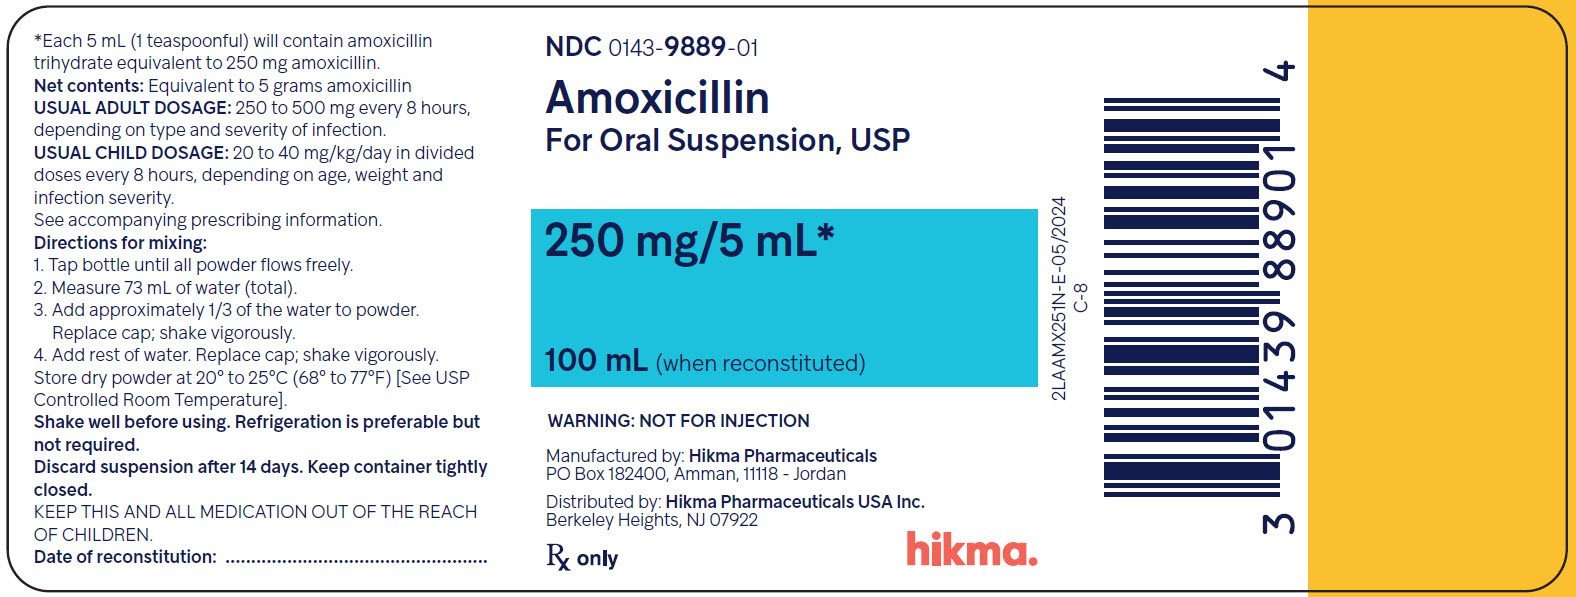 Amoxicillin for Oral Suspension USP, 250 mg/5 mL (100 mL when reconstituted) bottle label image